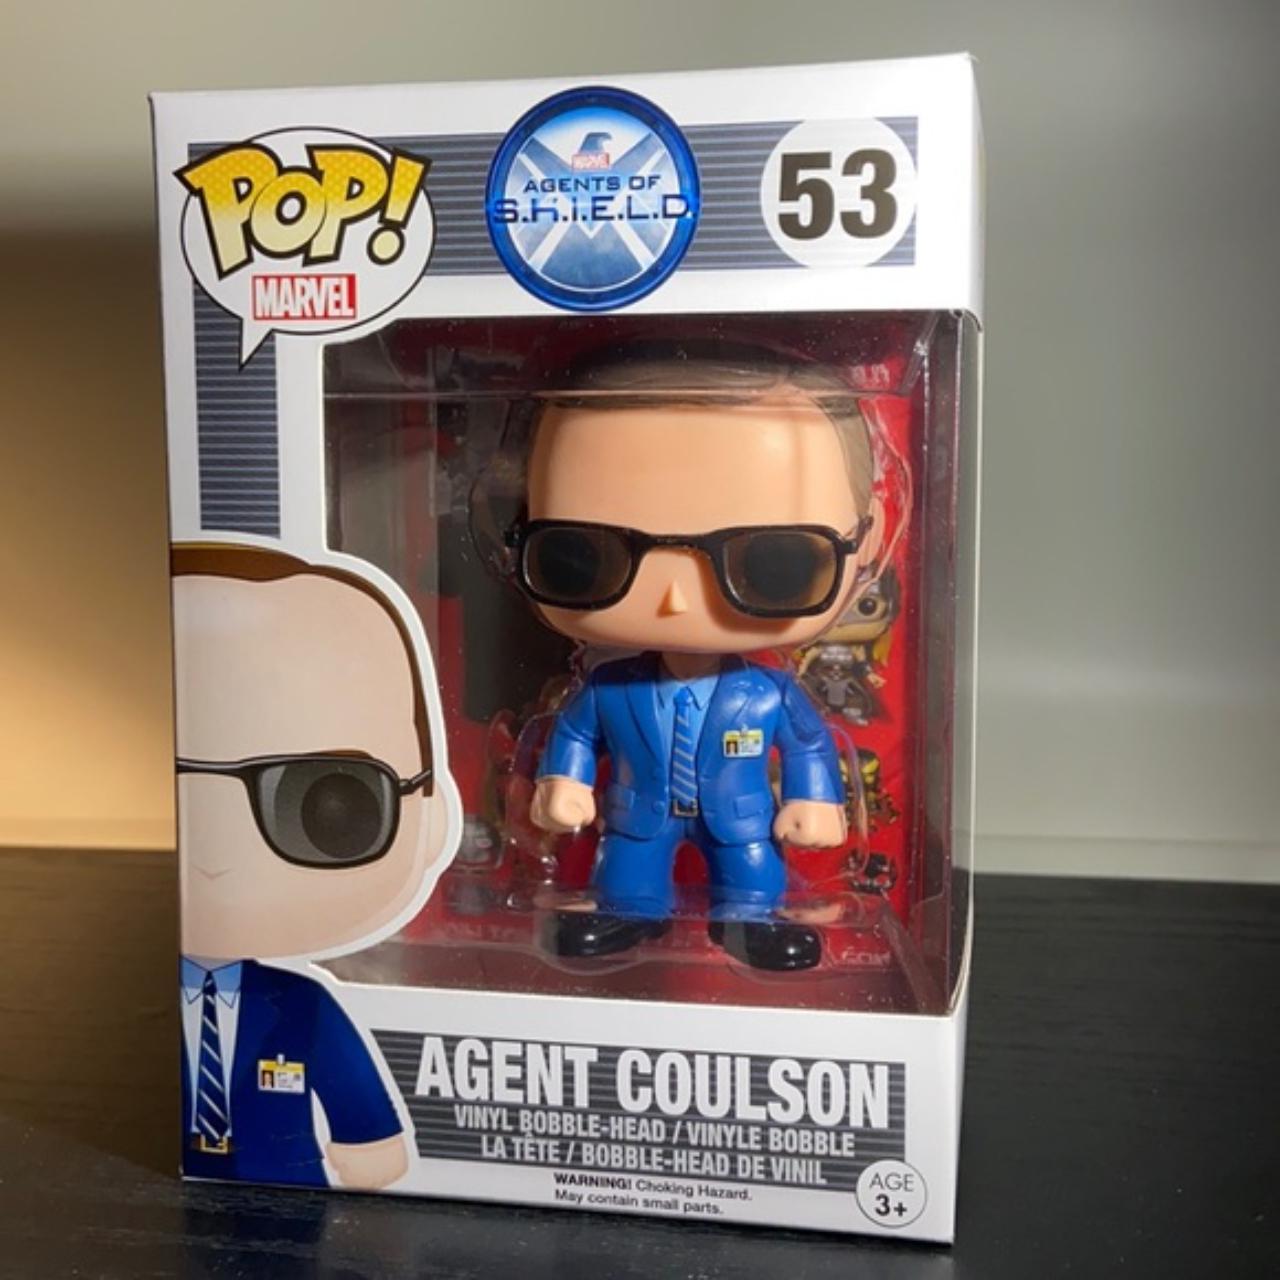 Product Image 1 - Agent Coulson
Type: Vinyl Art Toys
Brand: